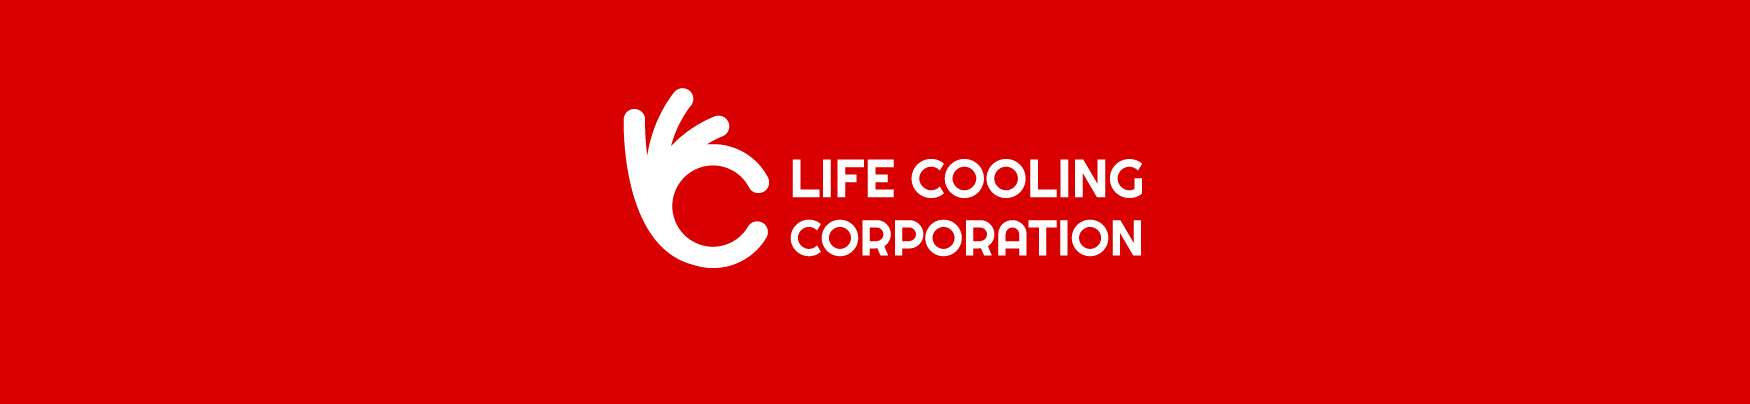 Life Cooling Corporation